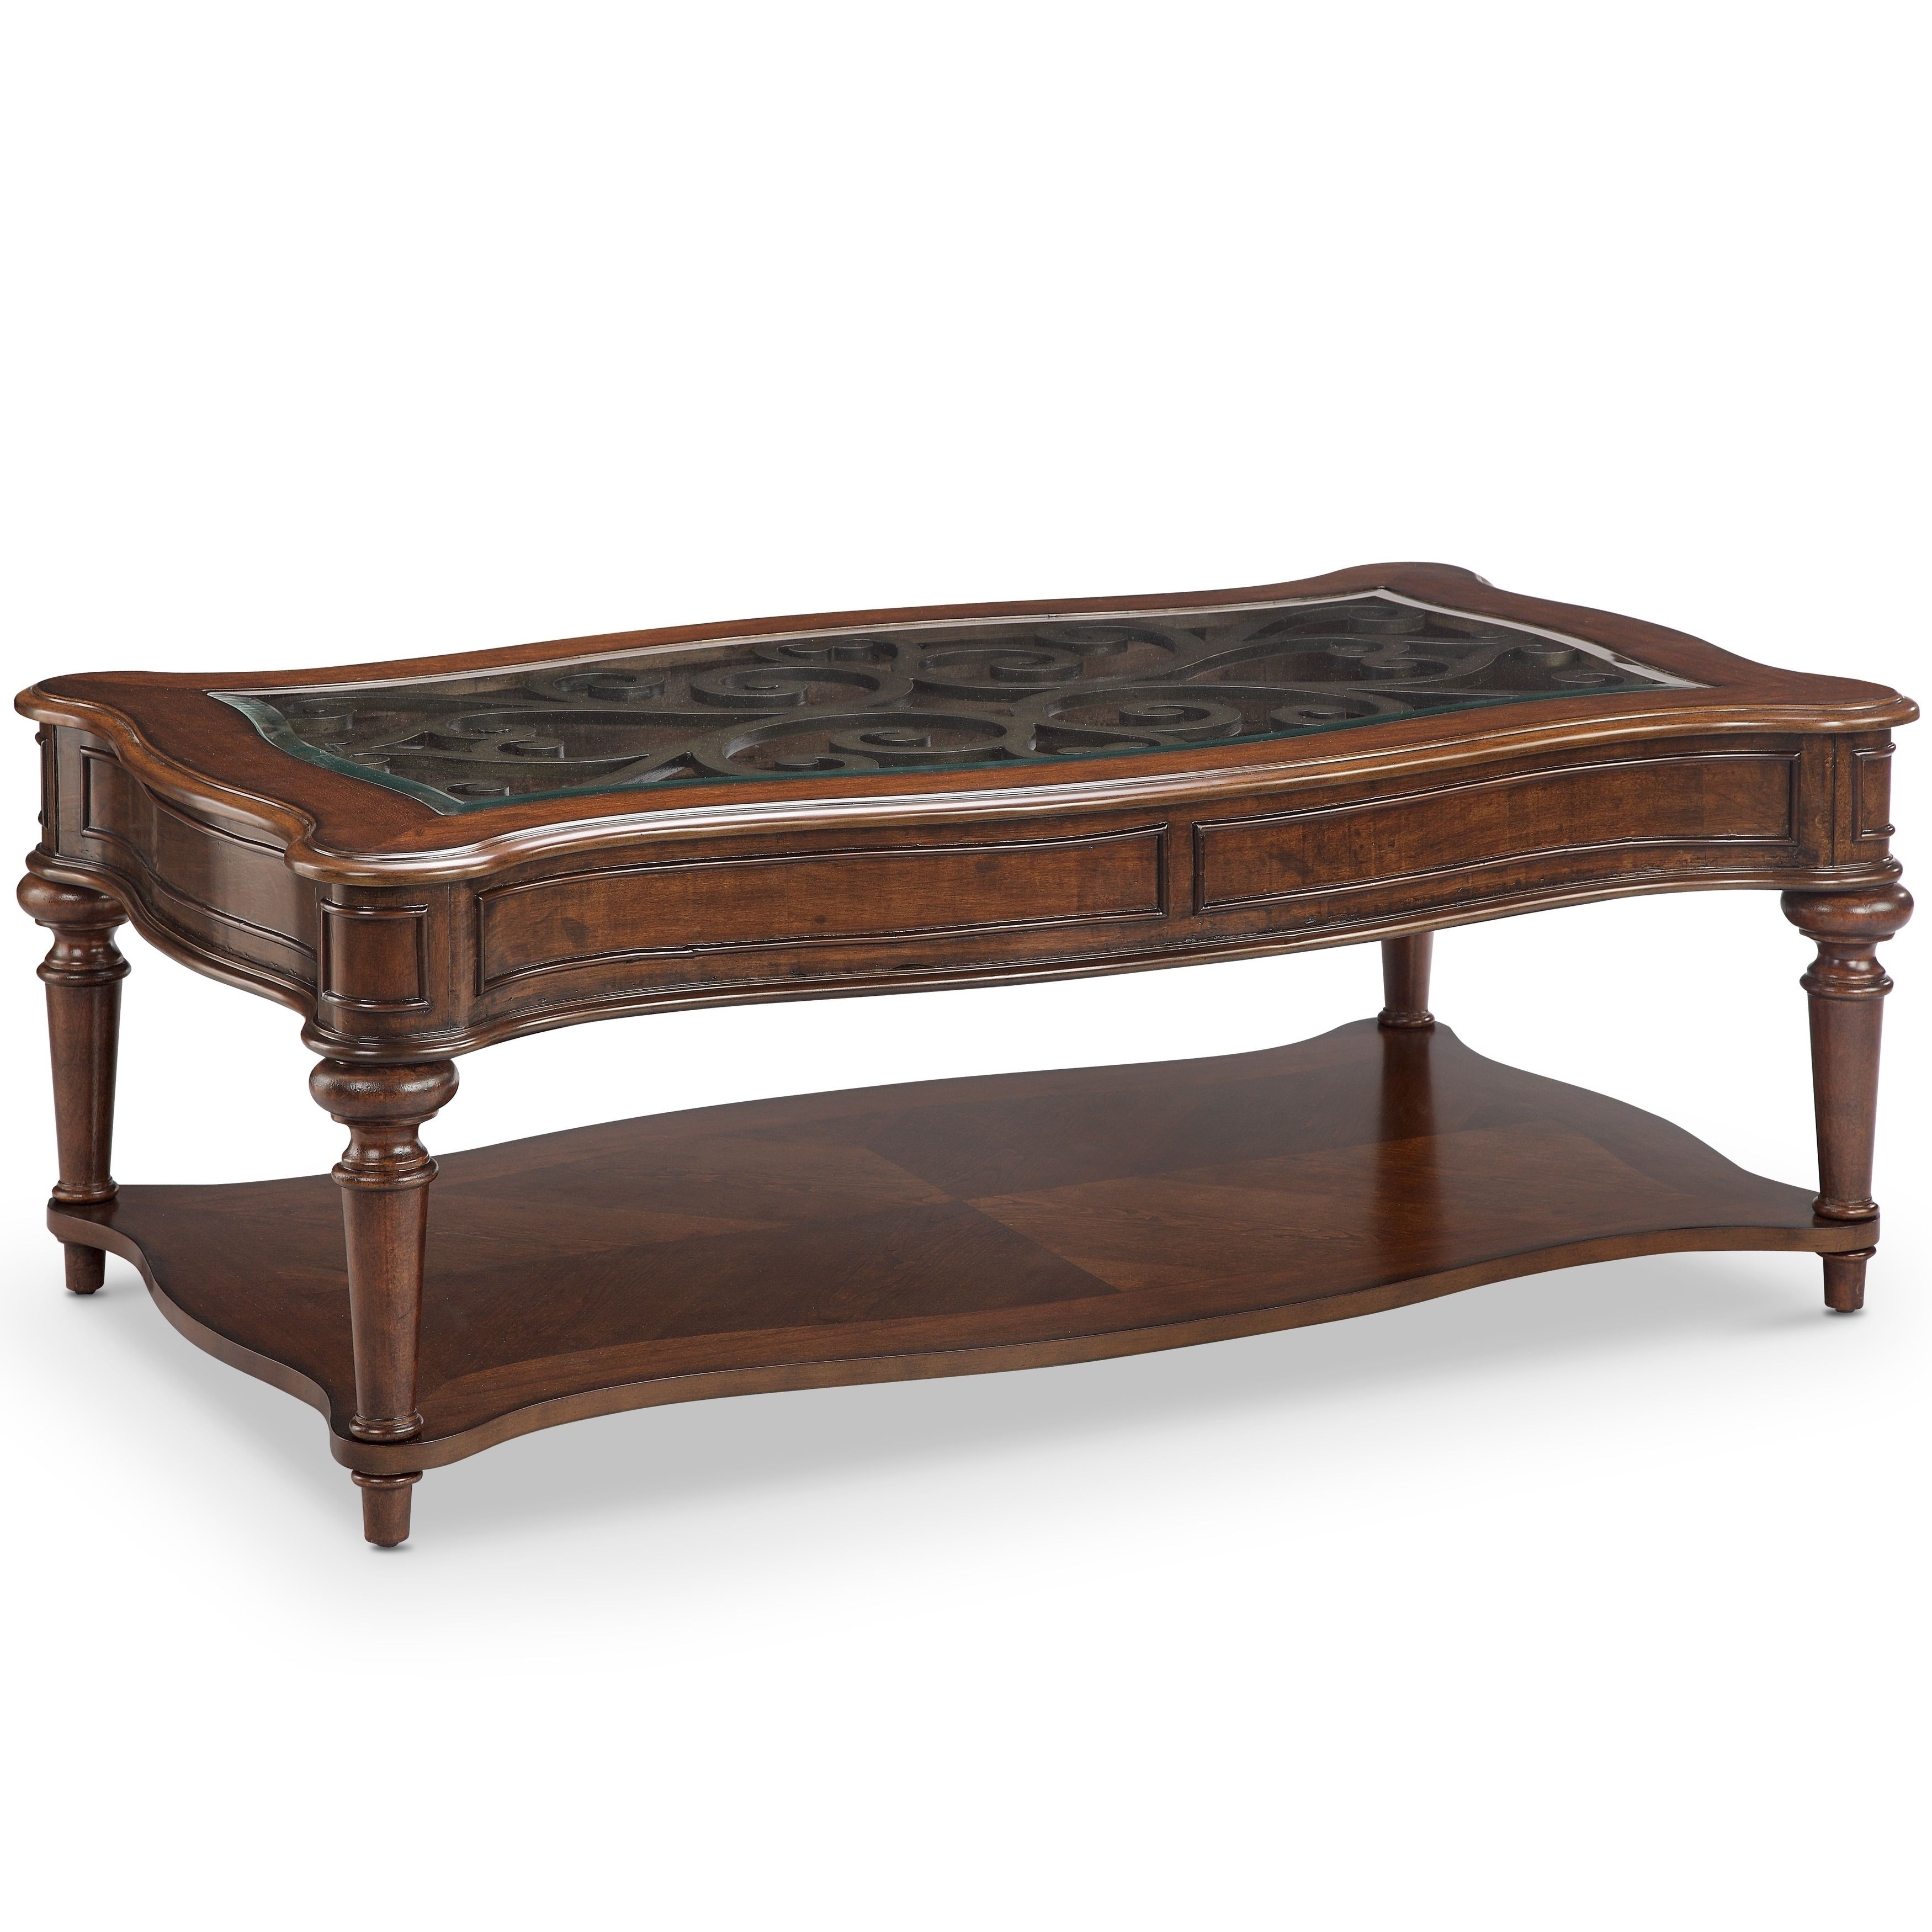 Shop Anastasia Traditional Rectangular Coffee Table With Casters With Regard To Element Ivory Rectangular Coffee Tables (View 2 of 30)